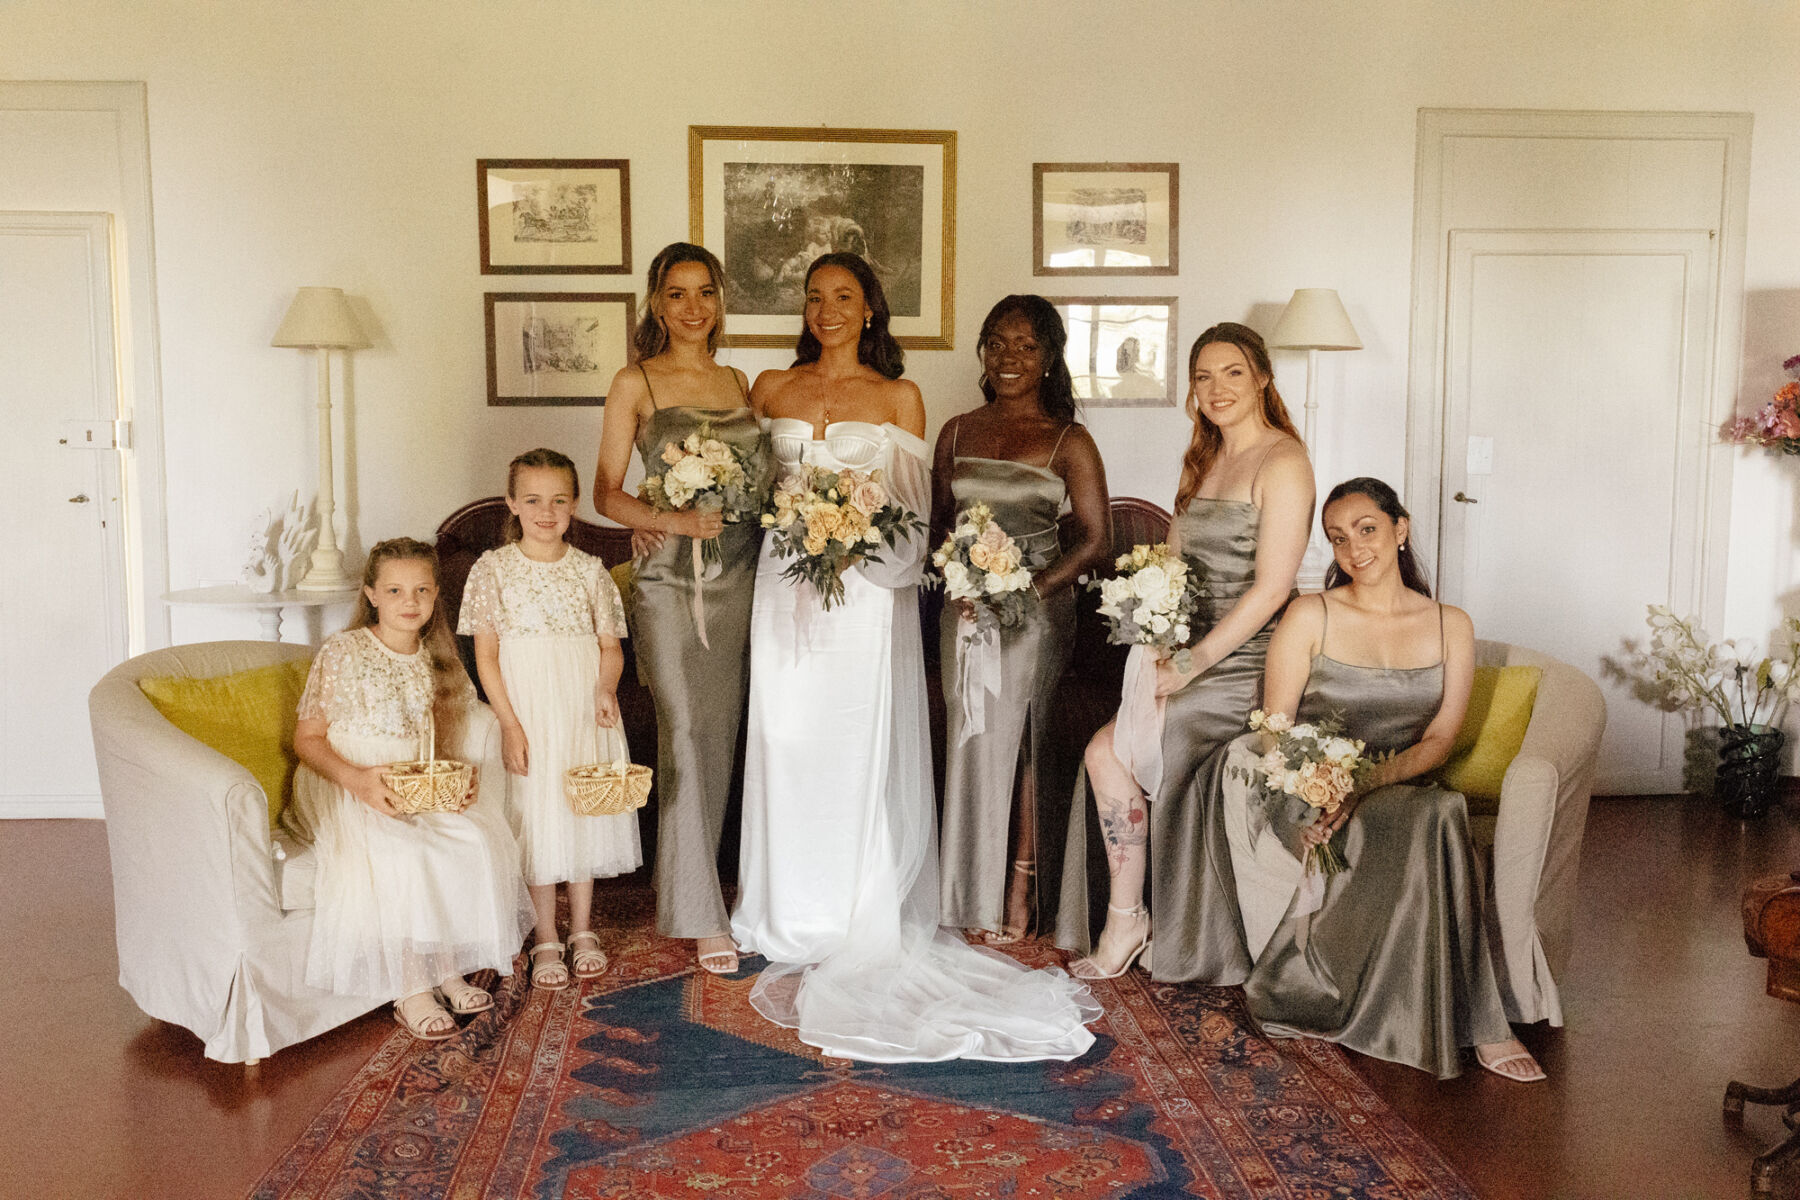 Bride in an Alena Leena wedding dress, surrounded by her bridesmaids in pale green dresses by Bec & Bridge, and flower girls wearing Needle and Thread dresses.